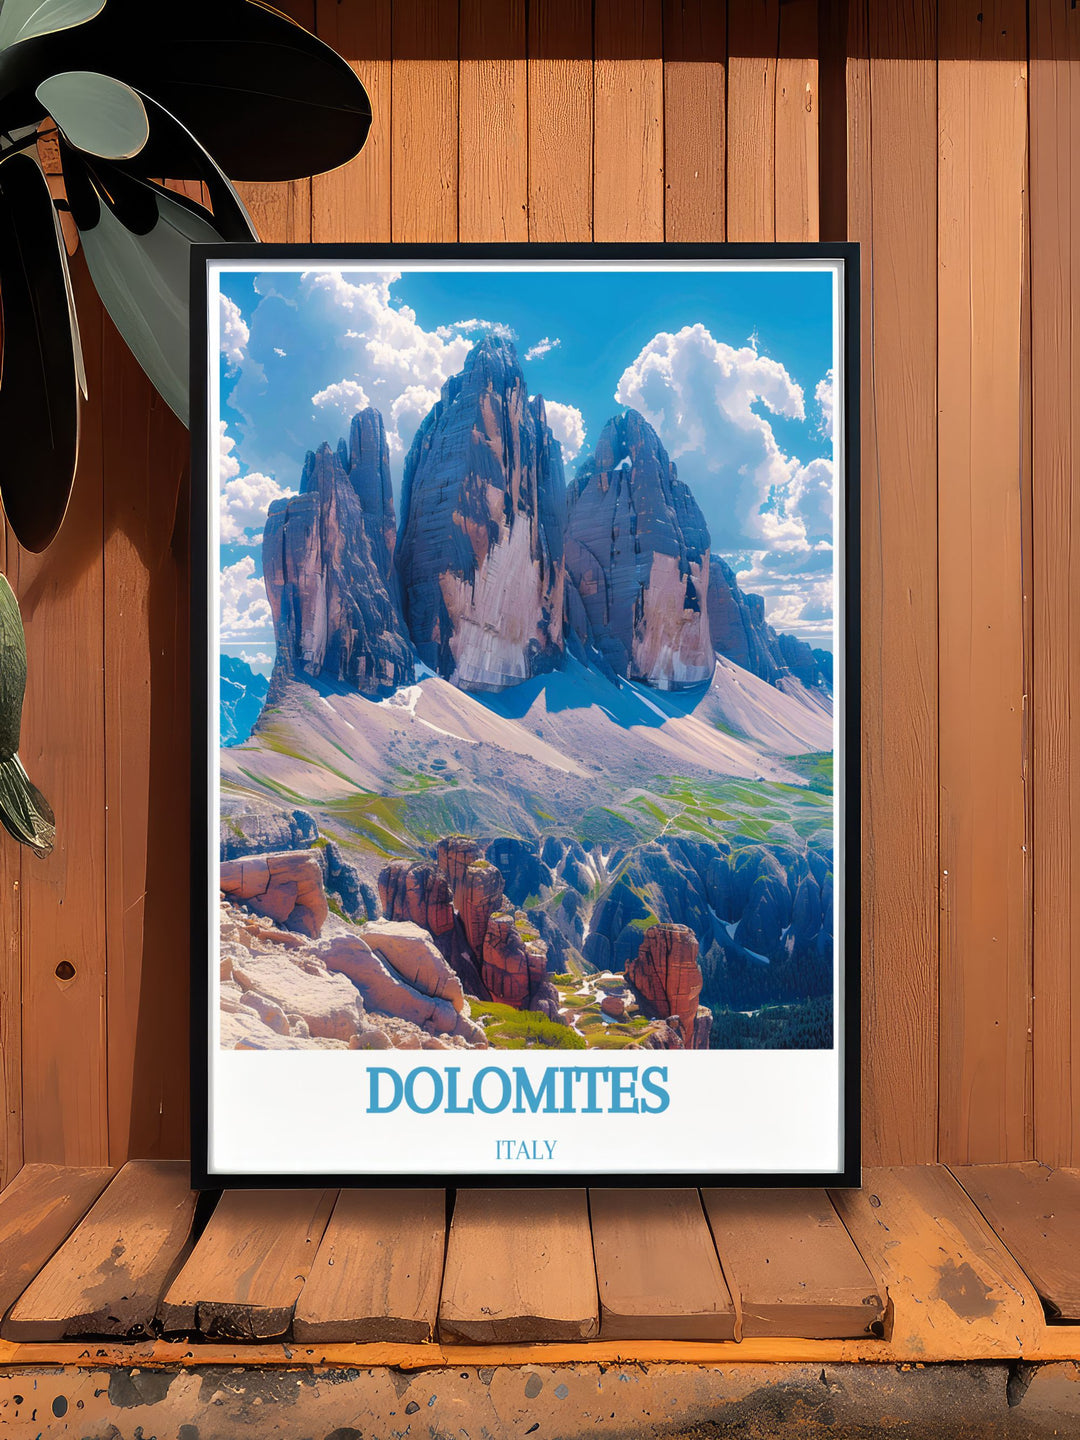 Custom print featuring unique perspectives of the Dolomites, capturing the rugged beauty and historical significance of Italys alpine region.